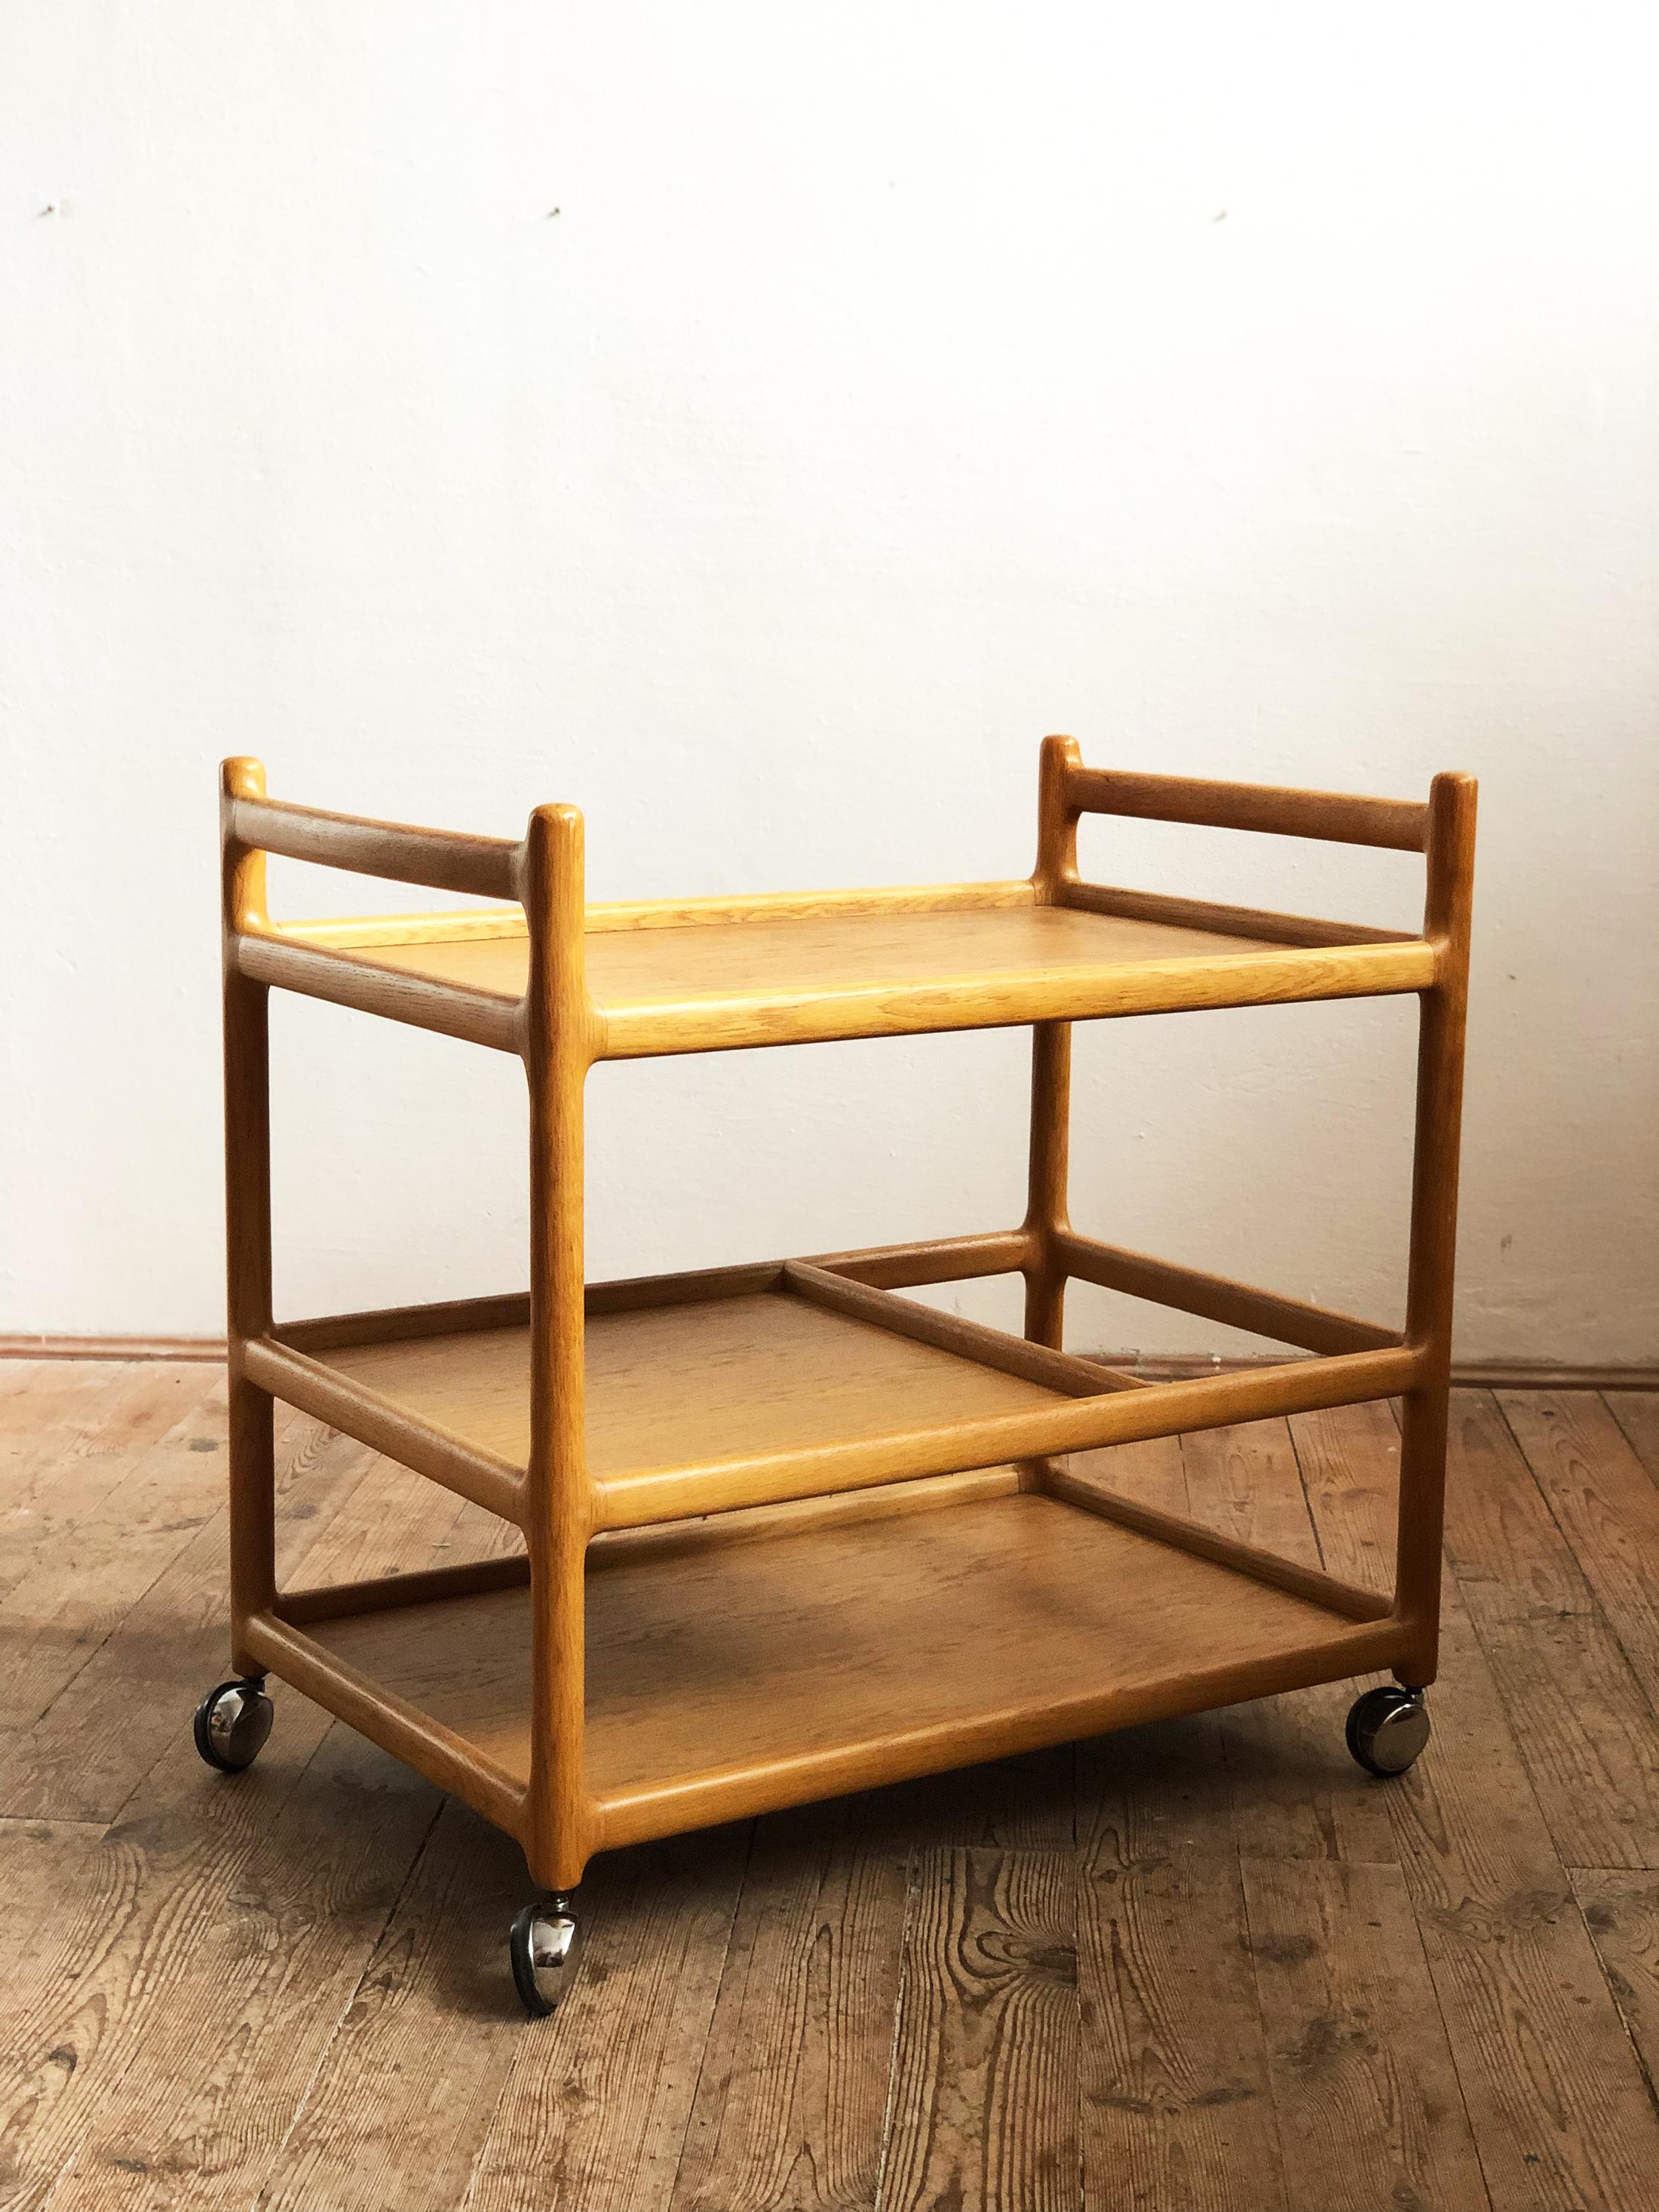 Midcentury Oak Serving Cart or Bar Trolley by Johannes Andersen for Silkeborg In Good Condition For Sale In Munich, Bavaria